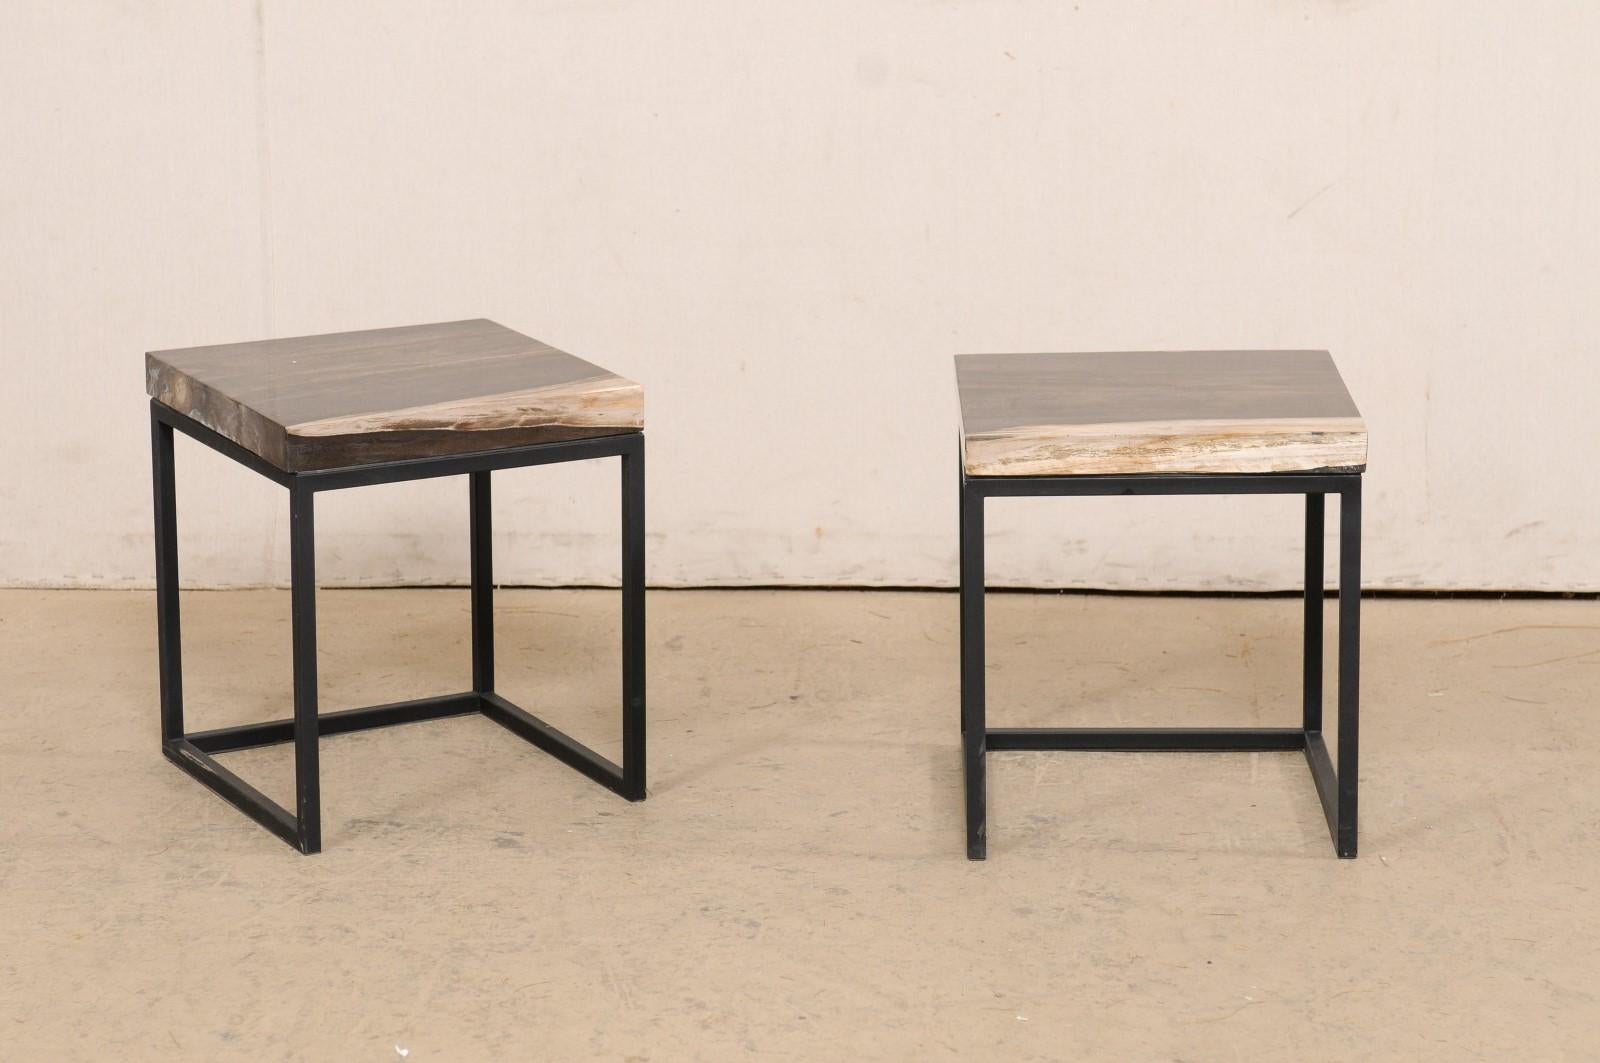 American Pair of Petrified Wood Top Side Tables on Custom Iron Bases, Charcoal/Beige Tops For Sale